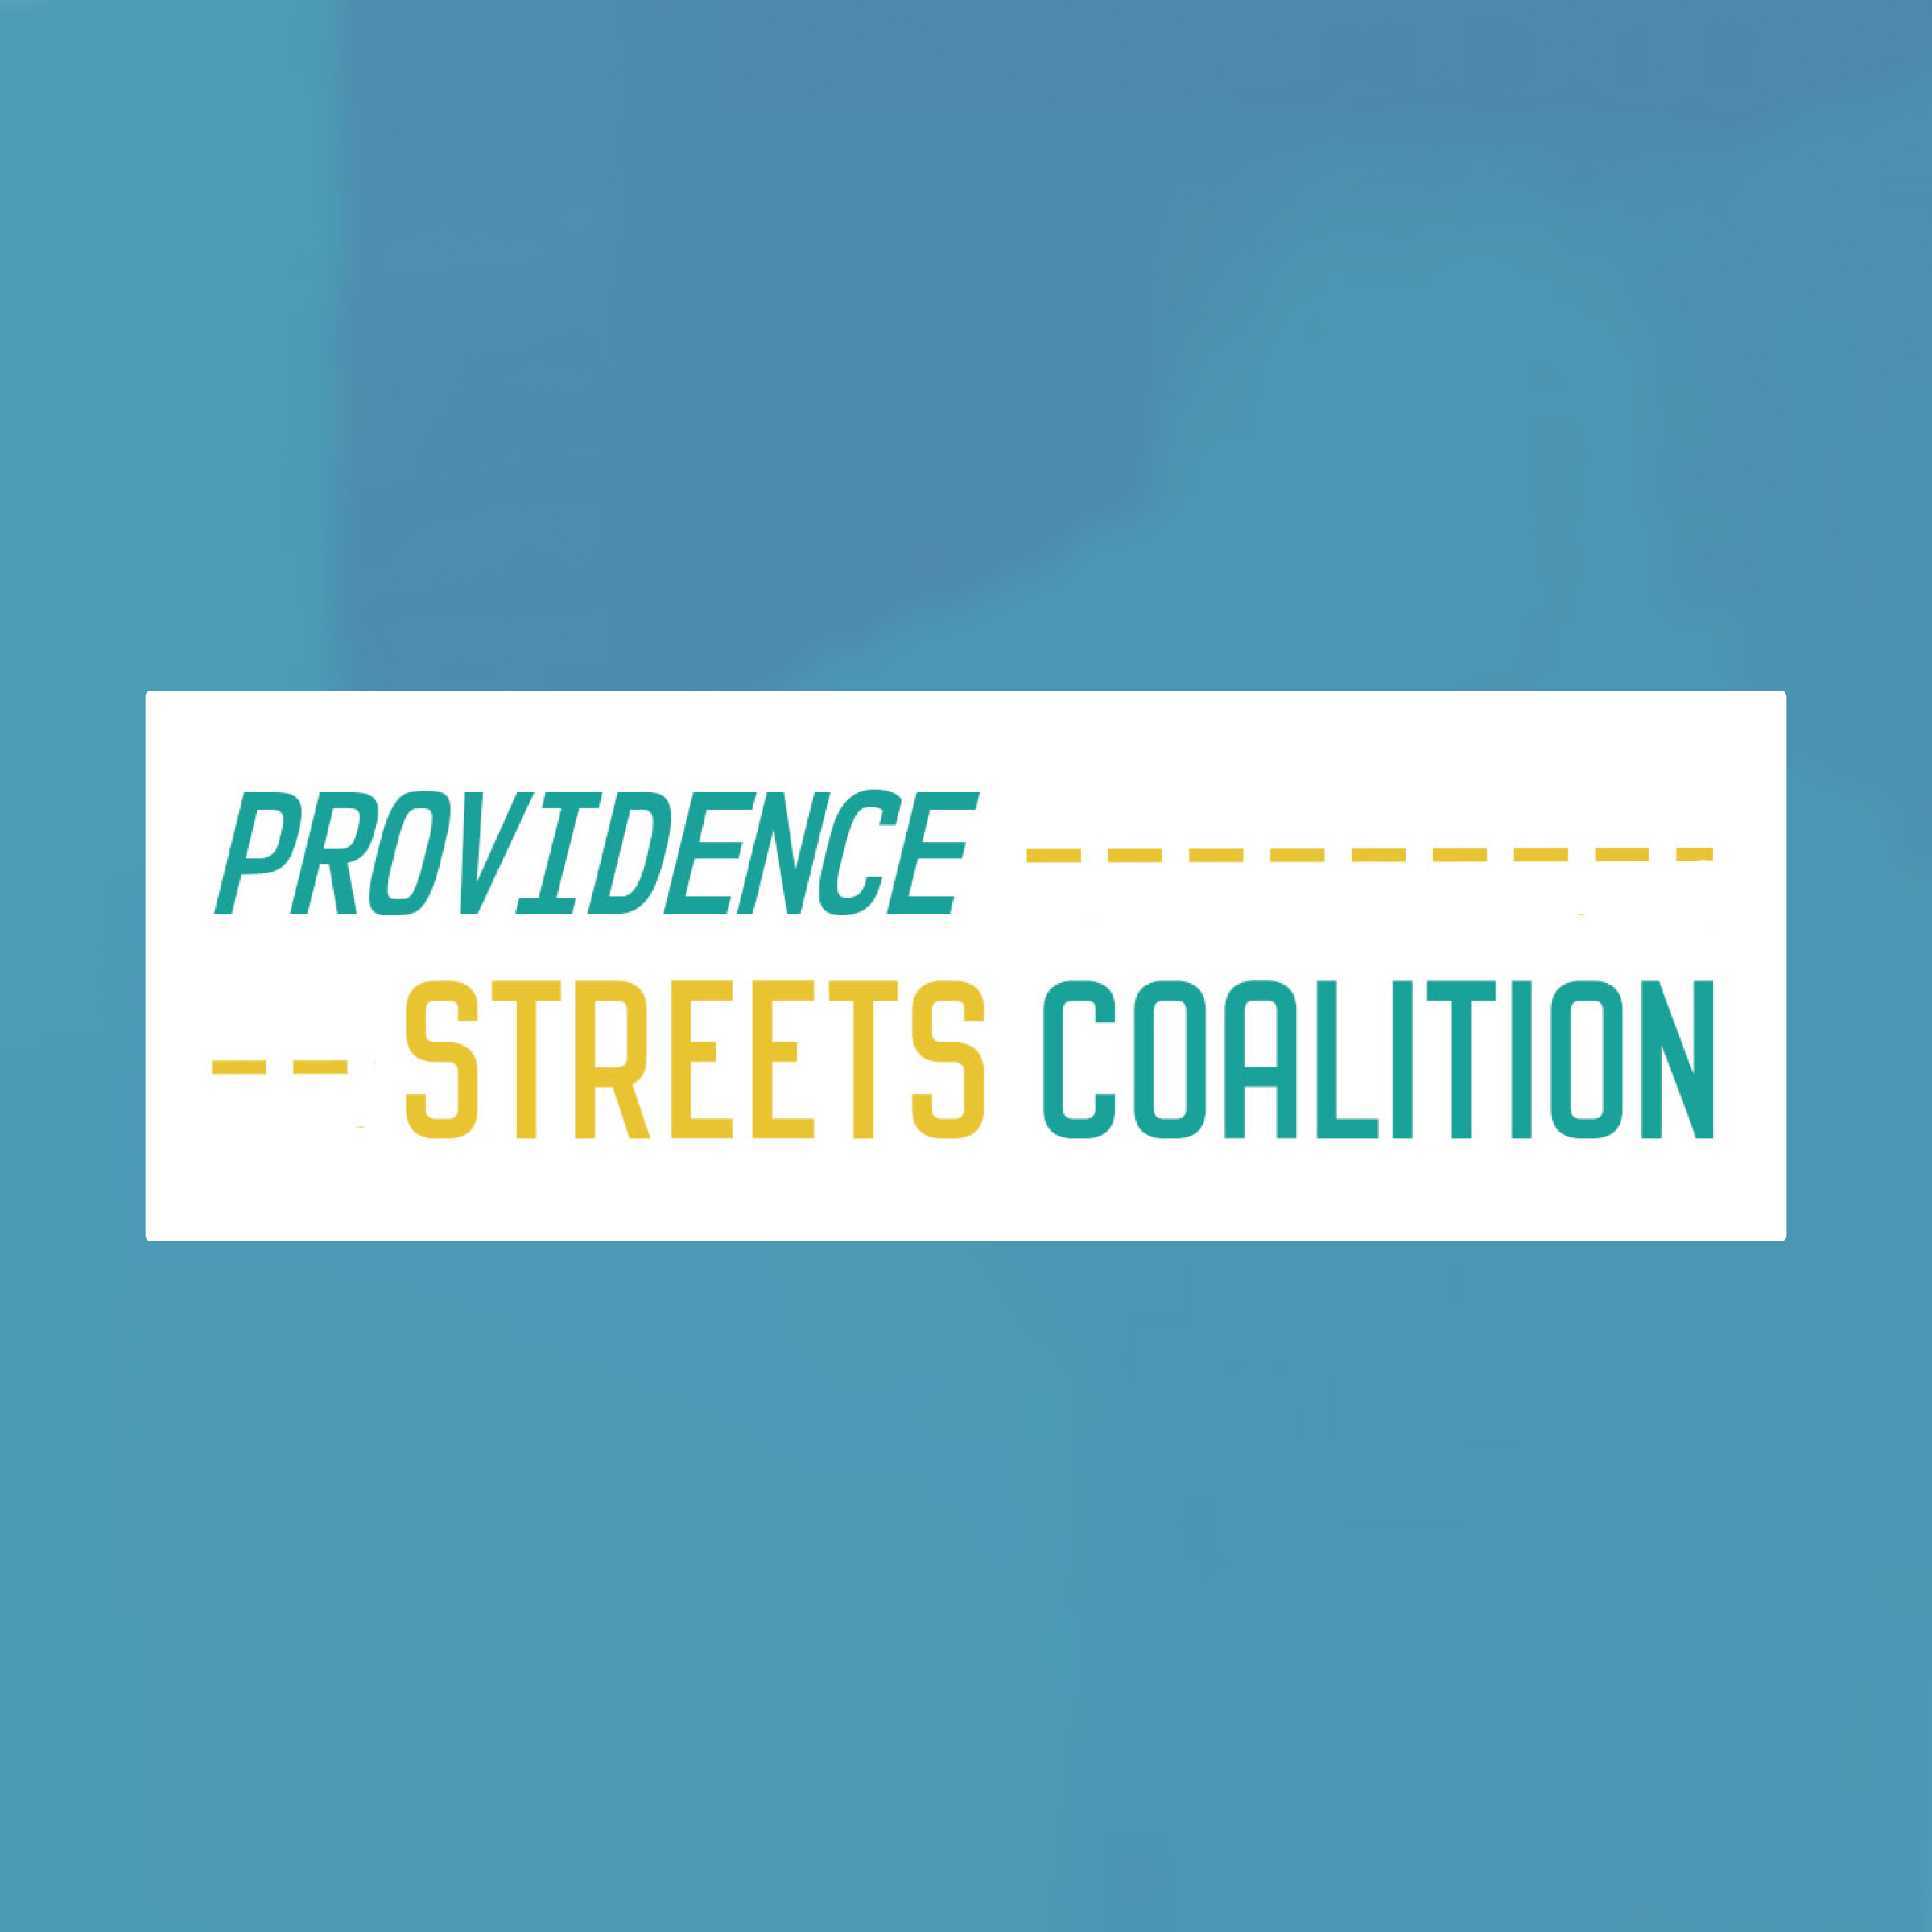 Book cover of Providence Streets Coalition against an abstract painted background